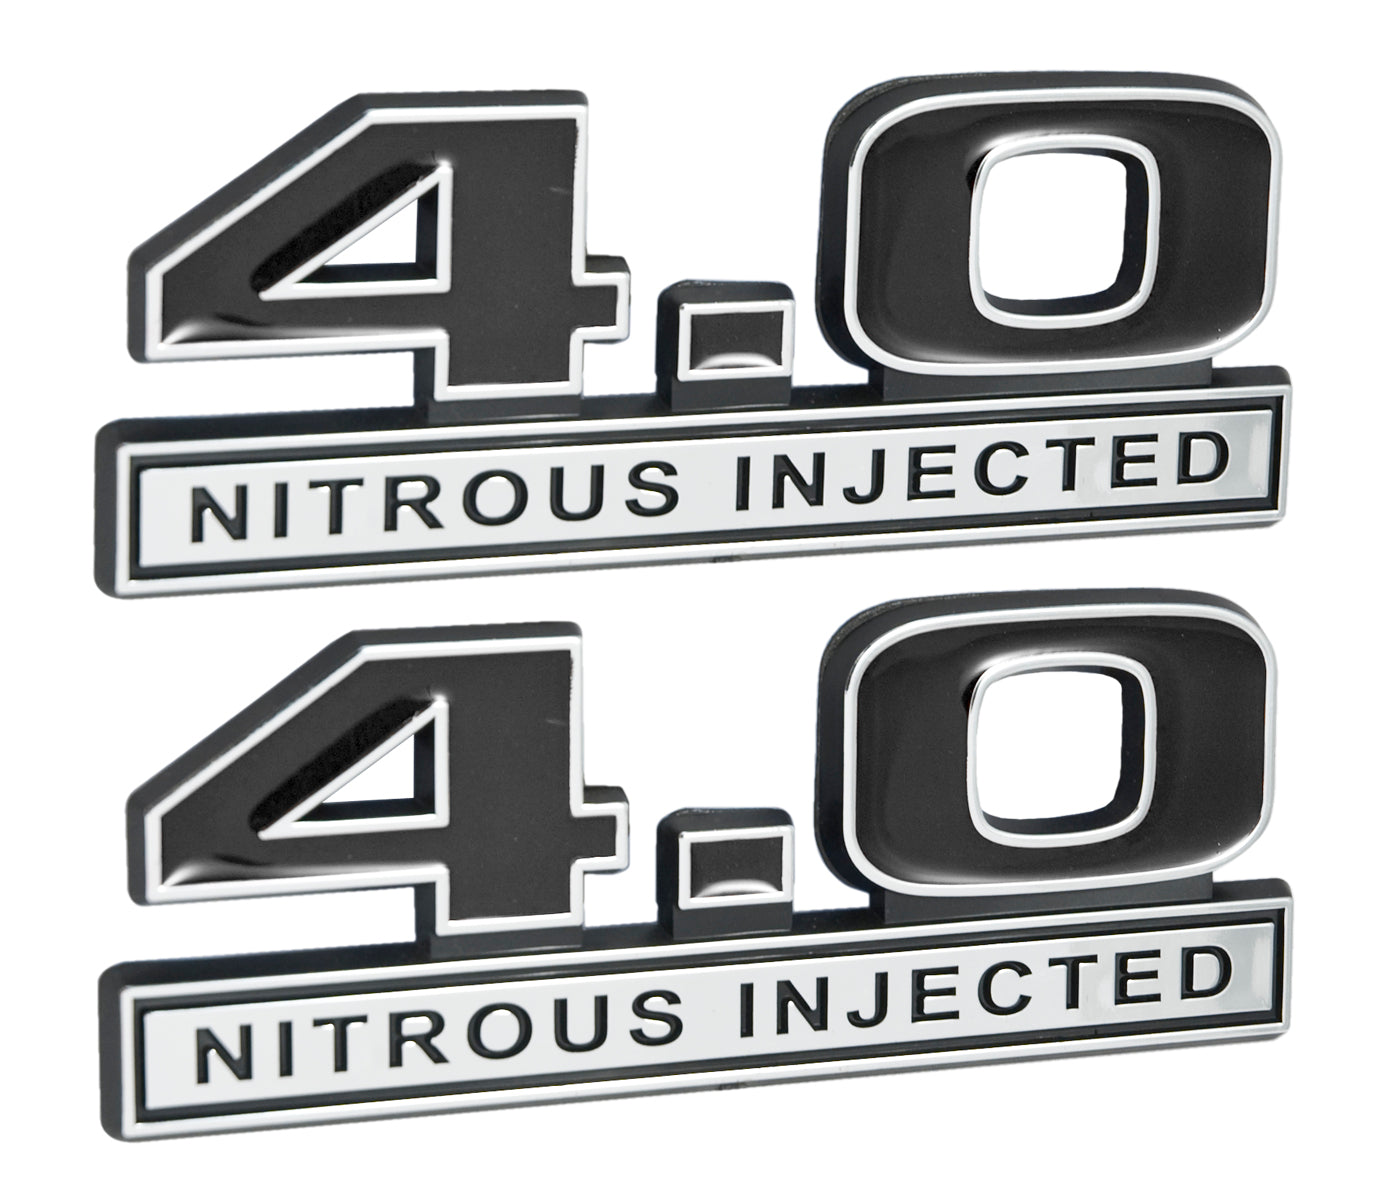 4.0 Nitrous Injected Engine Emblems Badges in Chrome & Black - 5" Long Pair